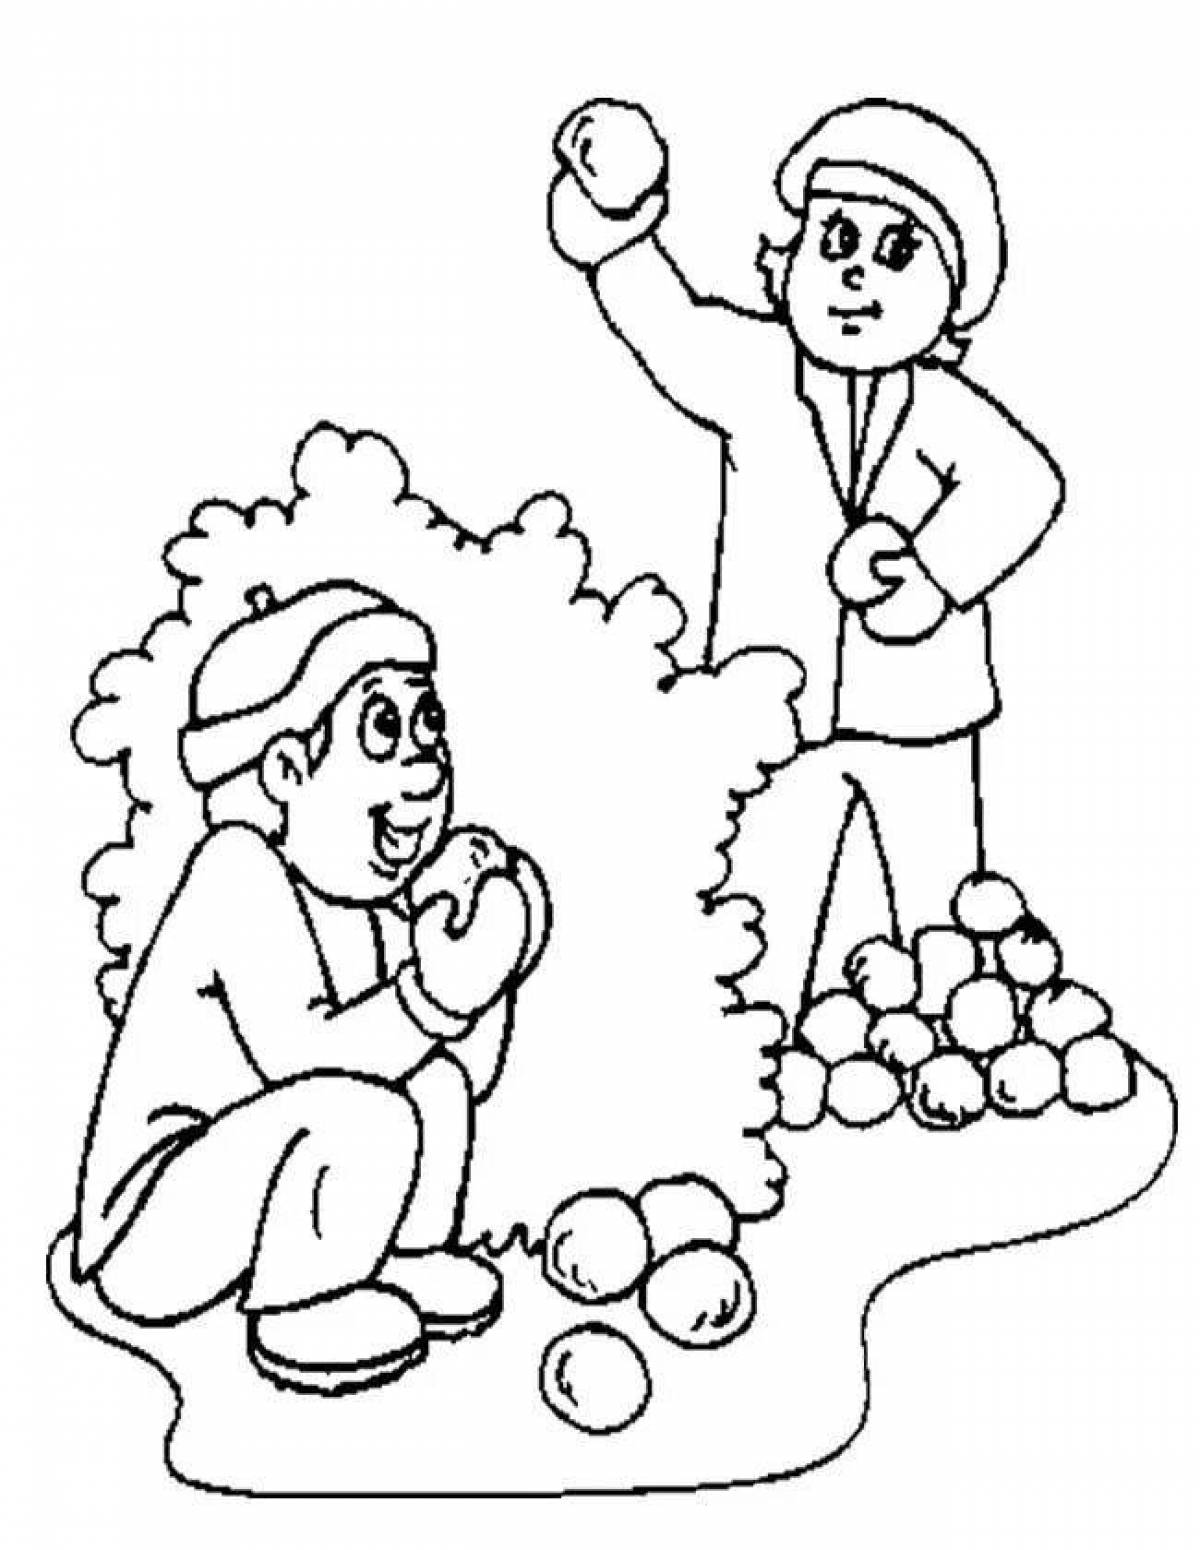 Coloring page excited kids playing snowballs